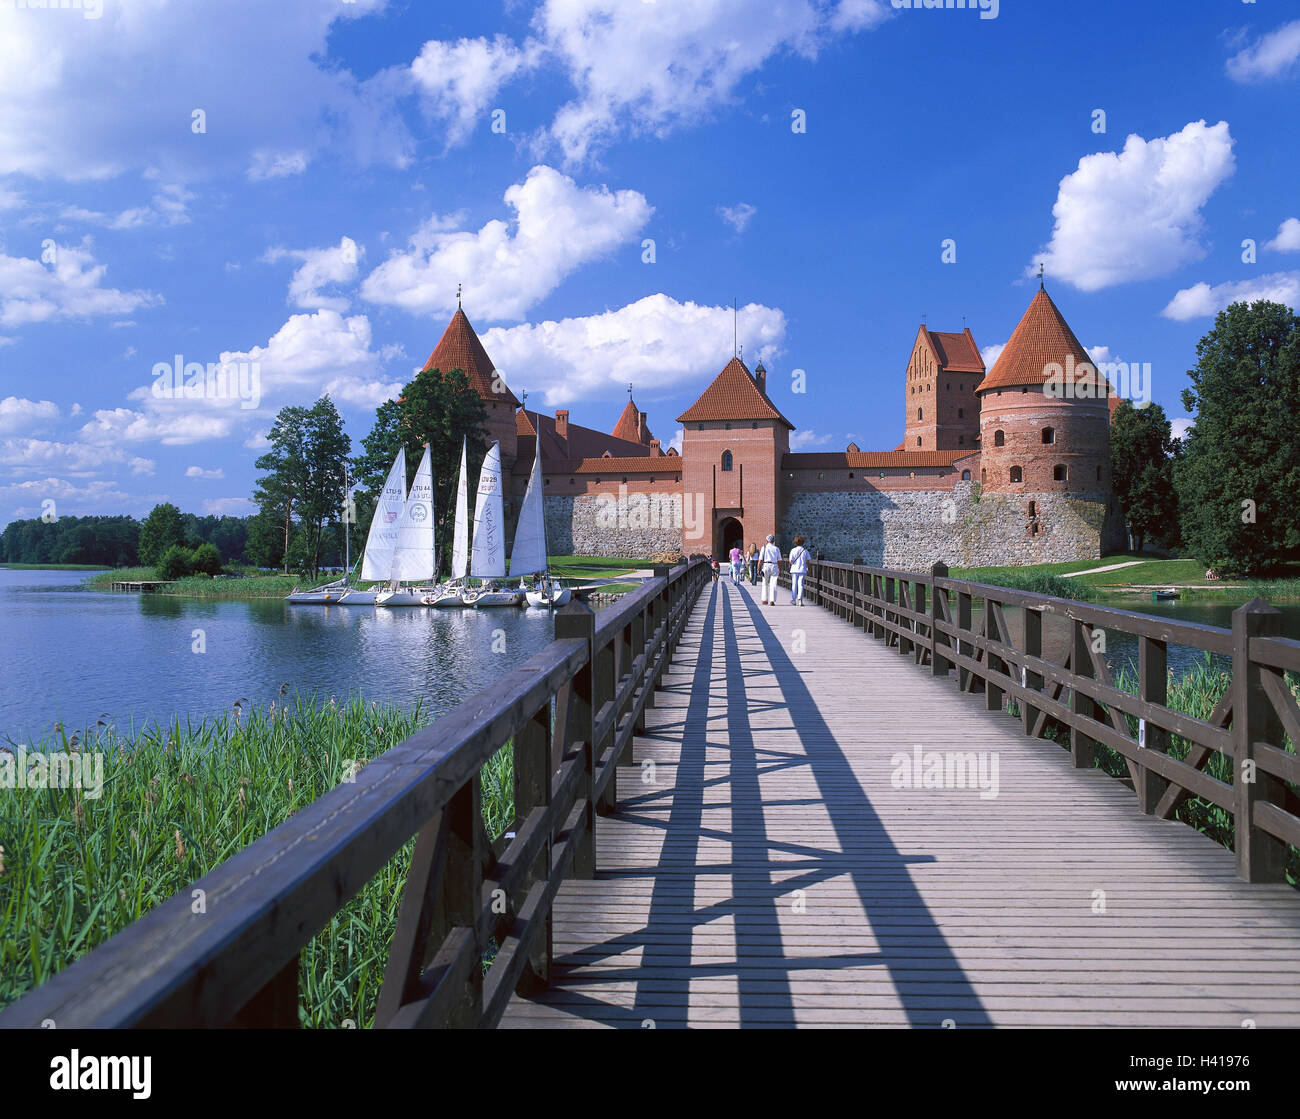 Lithuania, quay Tra, Galve Su, island castle, bridge, visitor, landing stage, sailboats, Europe, Nordosteuropa, the Baltic States, Lietuva, Lietuvos Respublika, Galvesee, Galve lake, island, castle, castle grounds, military plant, structure, architecture, place of interest, tourism, back view, wooden jetty, connection bridge, lake, sailboats, heavens, clouds Stock Photo